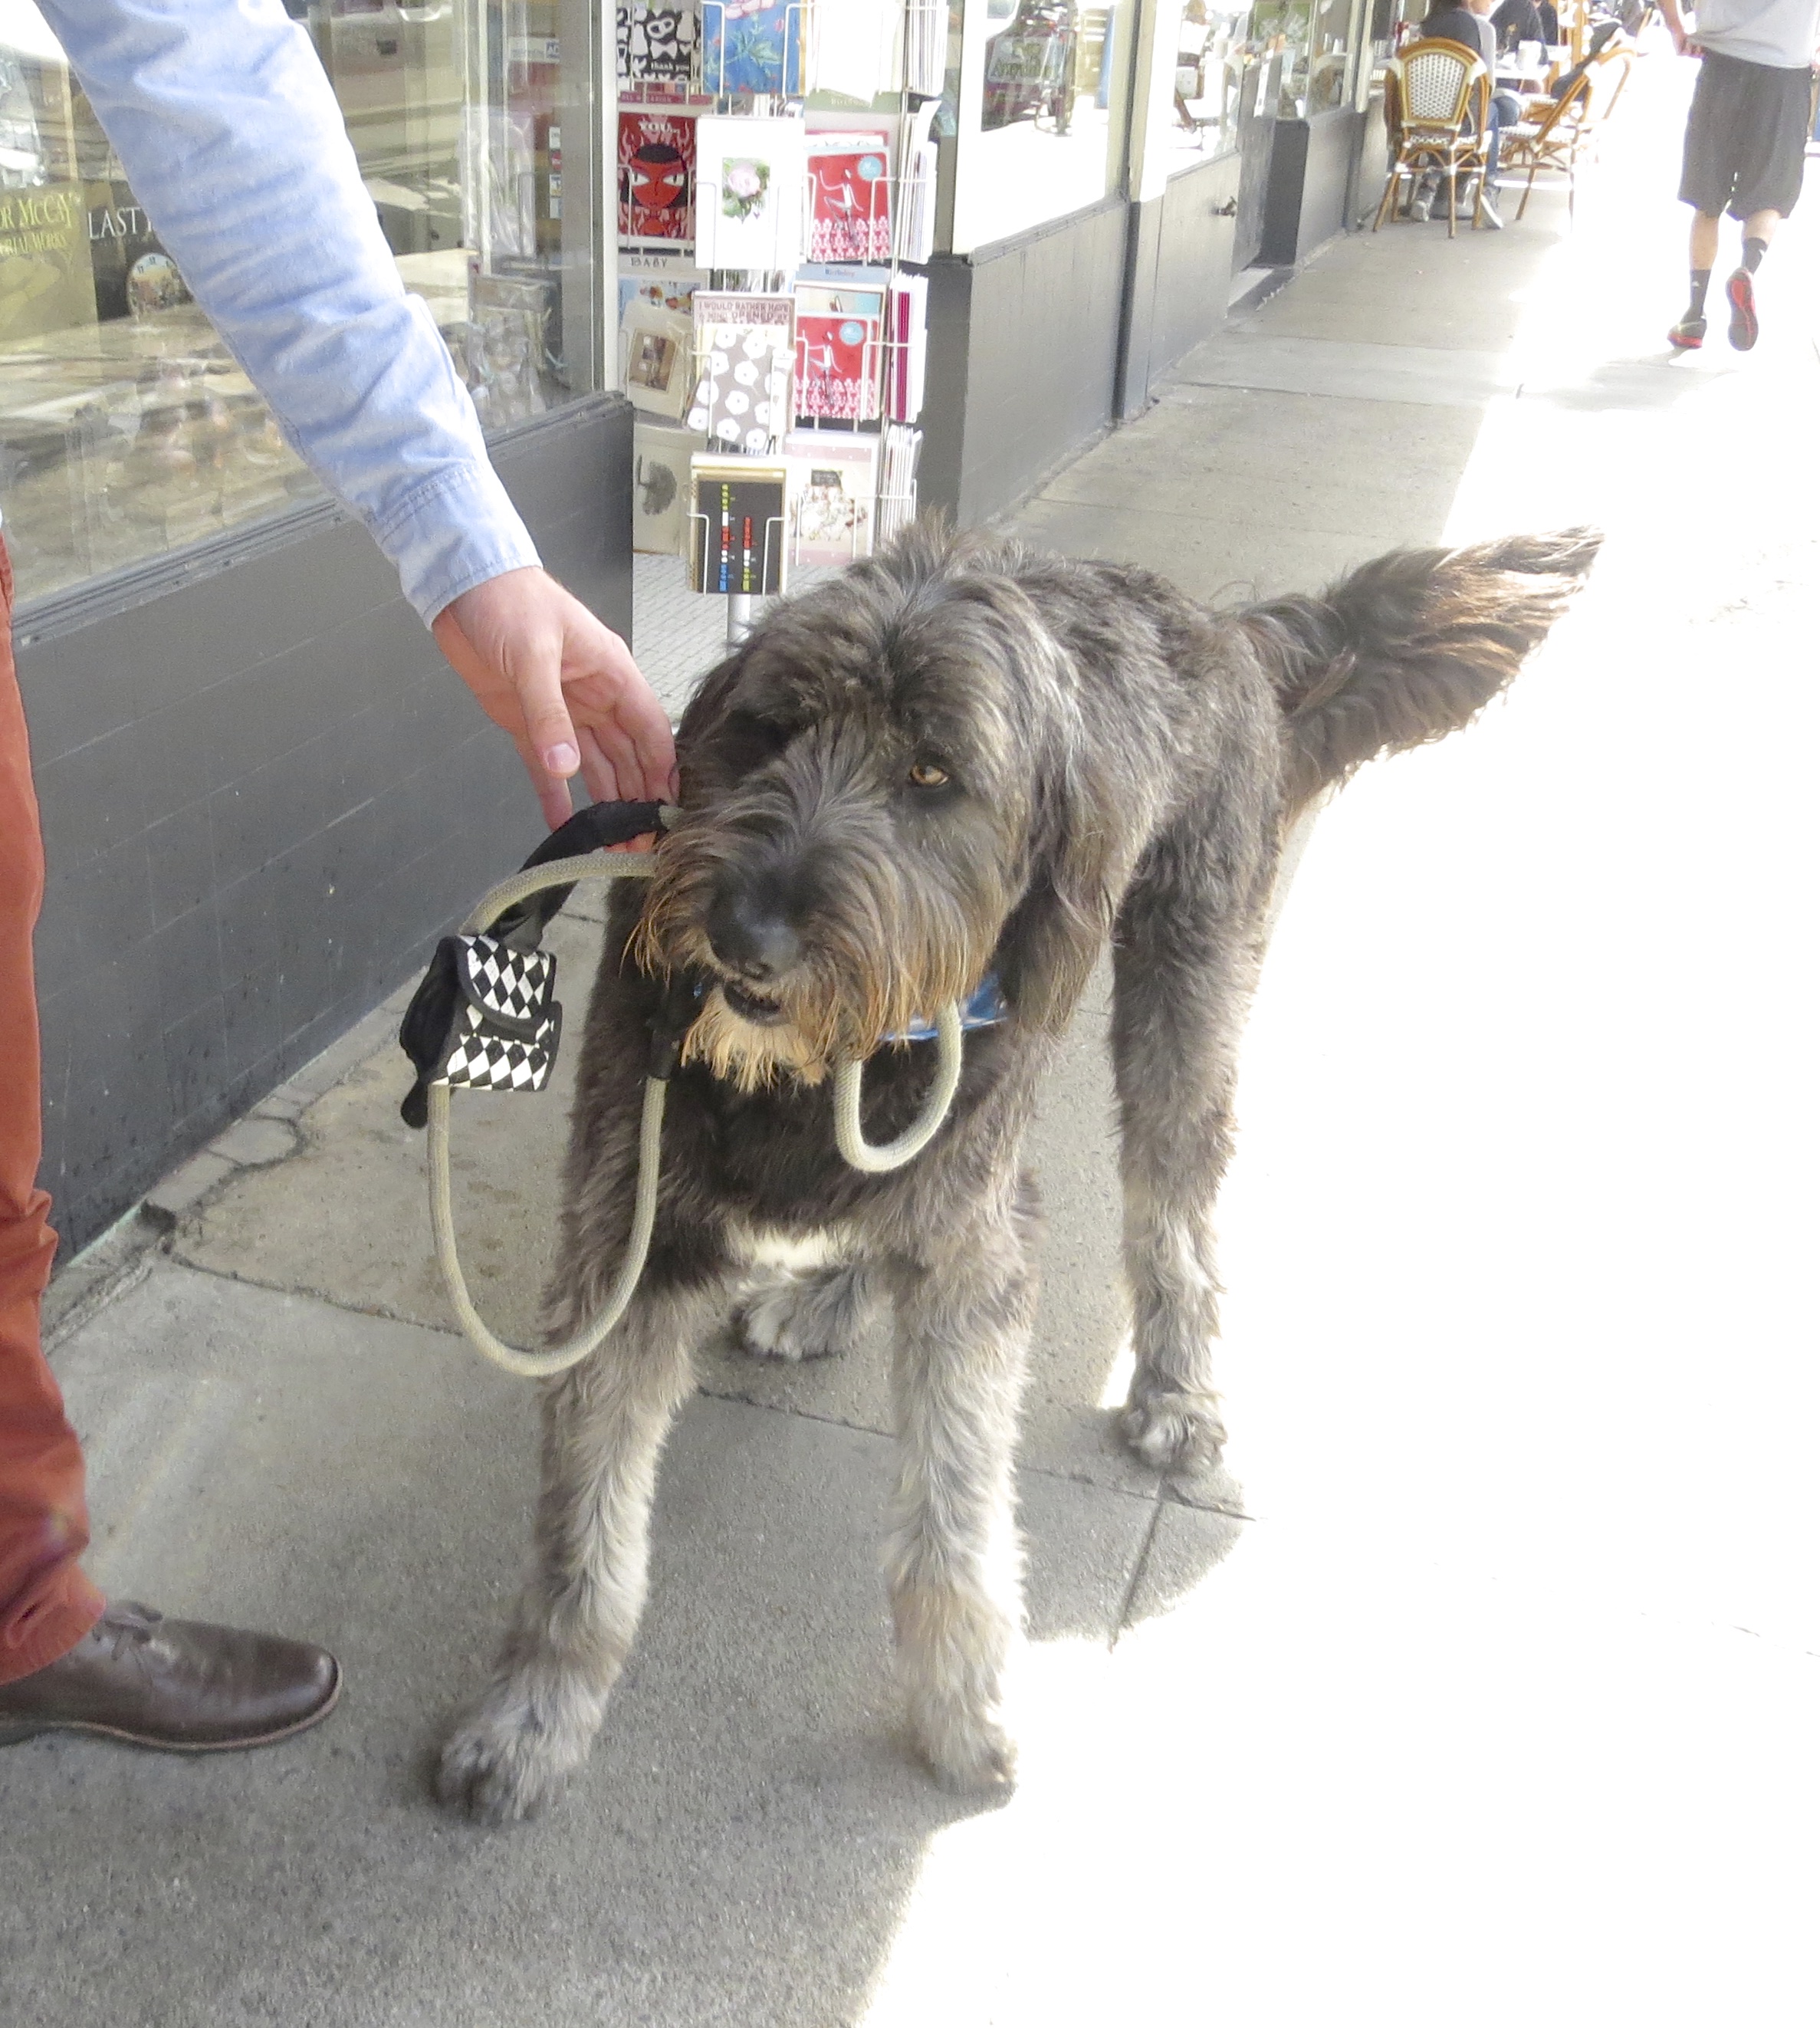 Grey Golden Retriever/Old English Sheepdog Mix With A White Spot On His Chest Holding His Own Leash In His Mouth